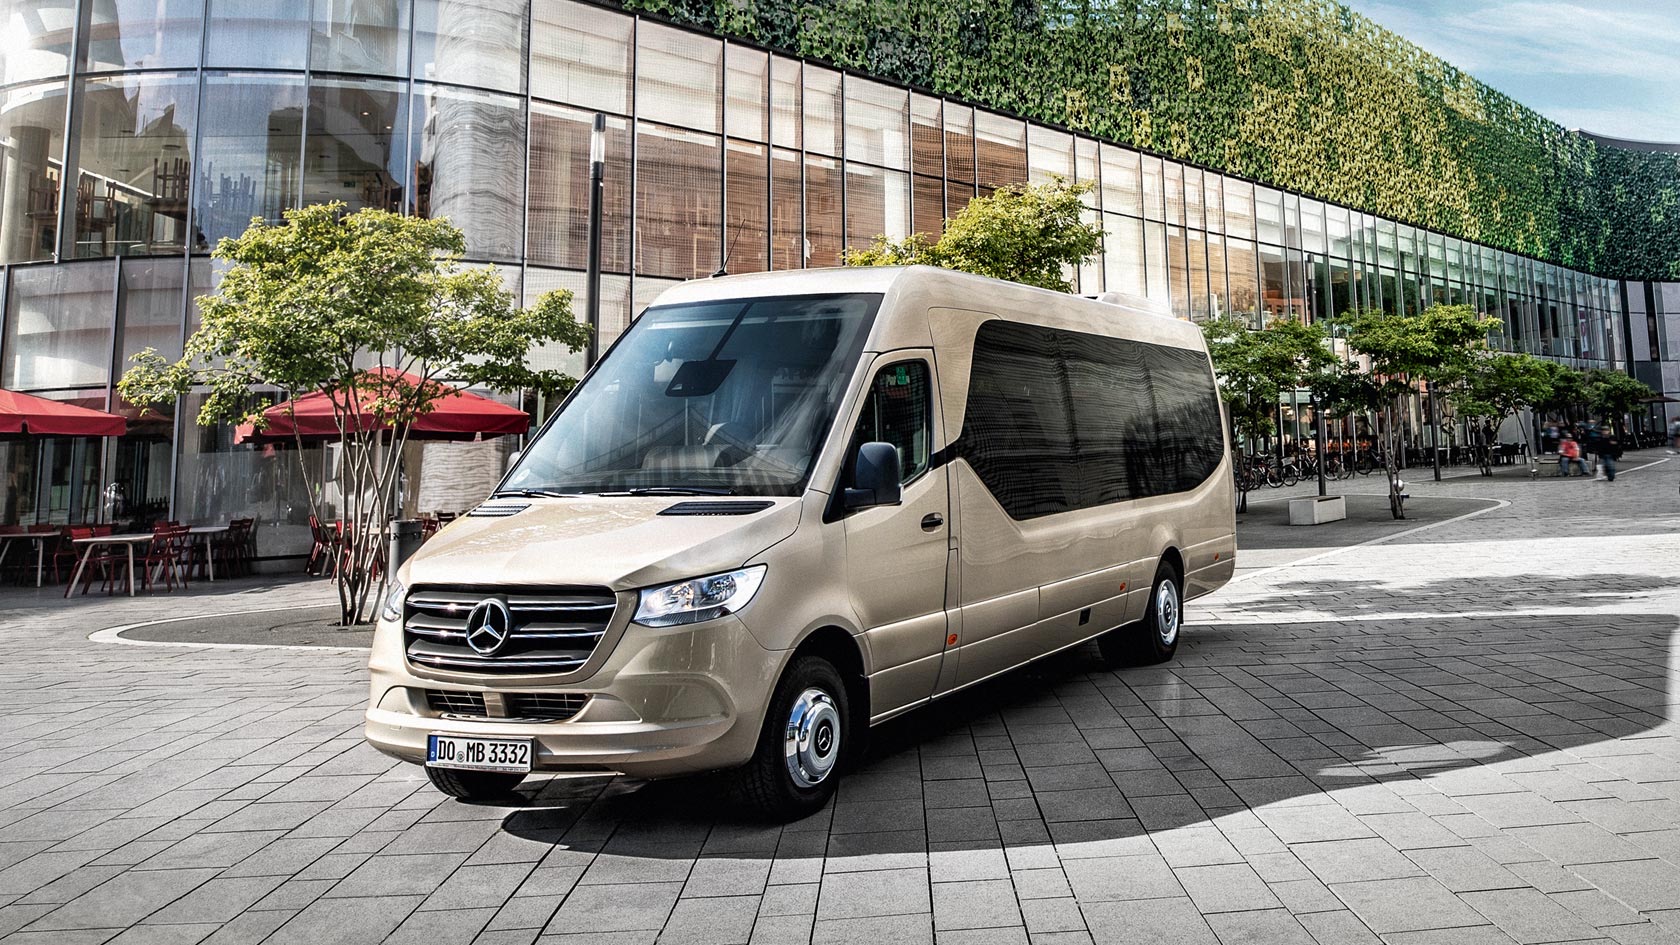 Minibus Hire in the UK: What You Need to Know Before Booking